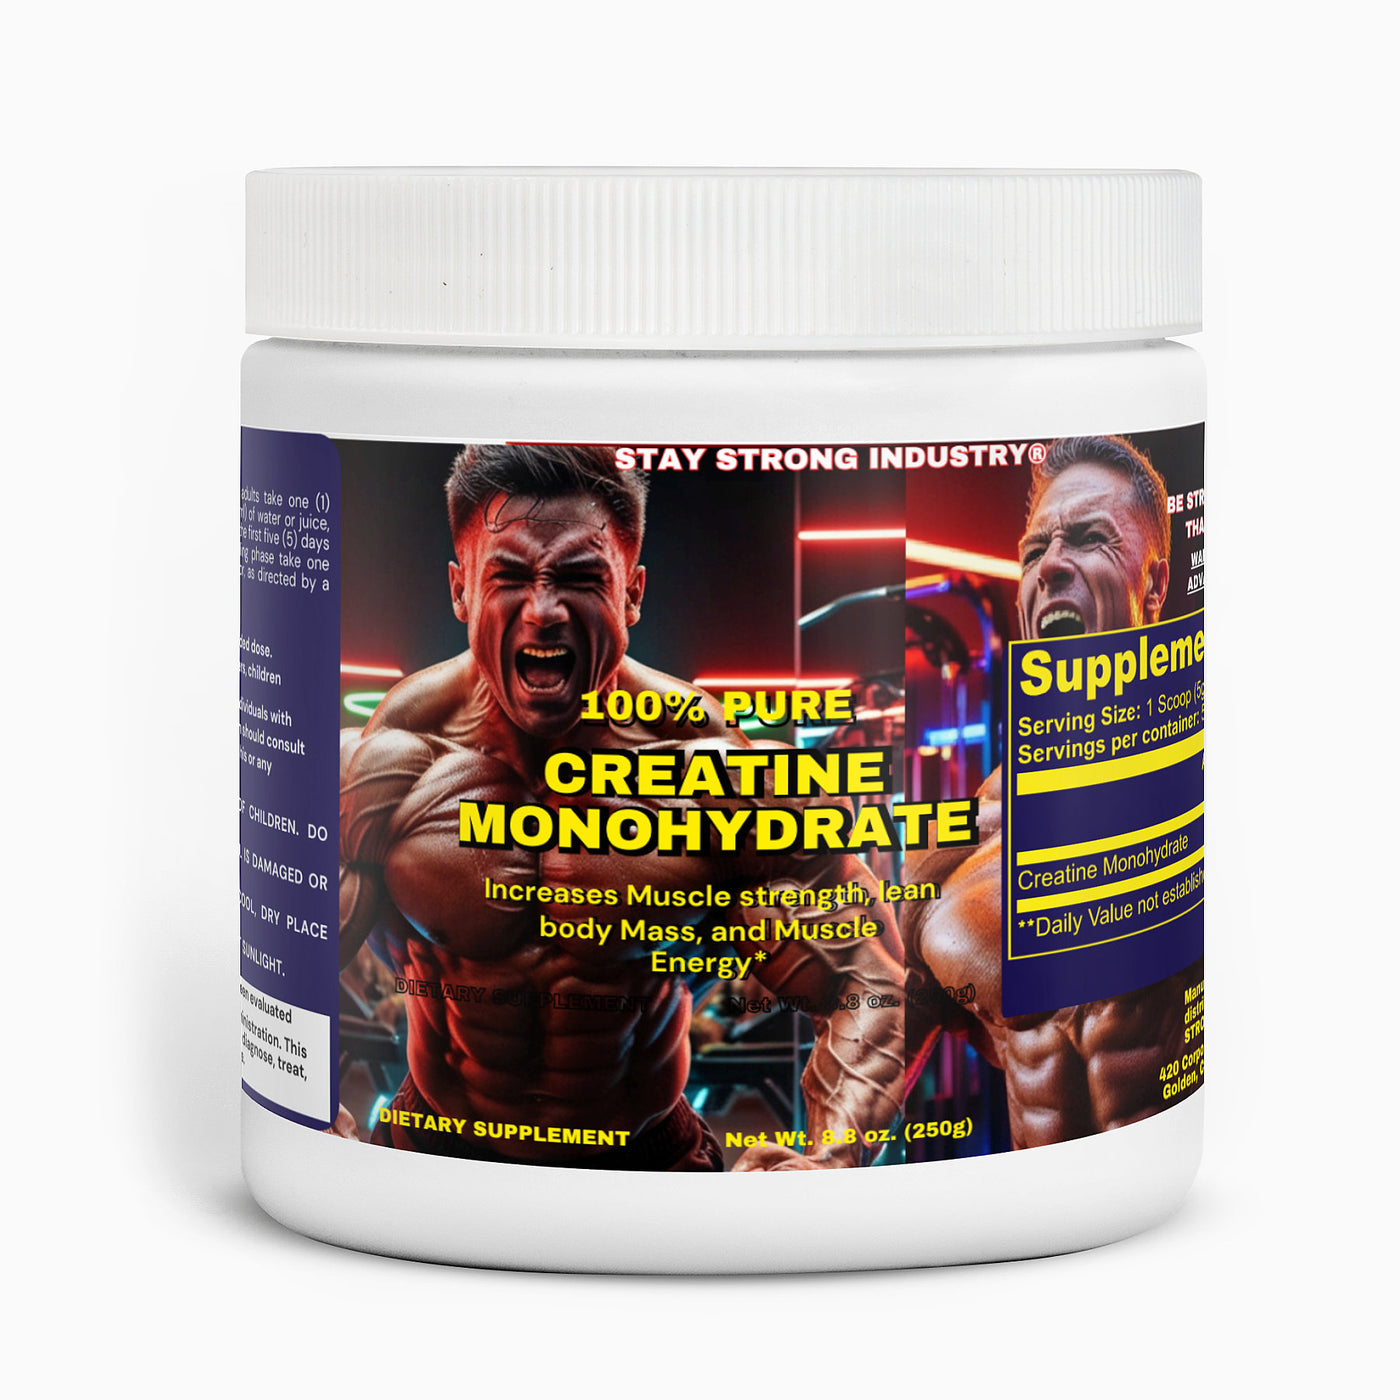 Creatine Monohydrate "STAY STRONG " LIMITED EDITION !!!